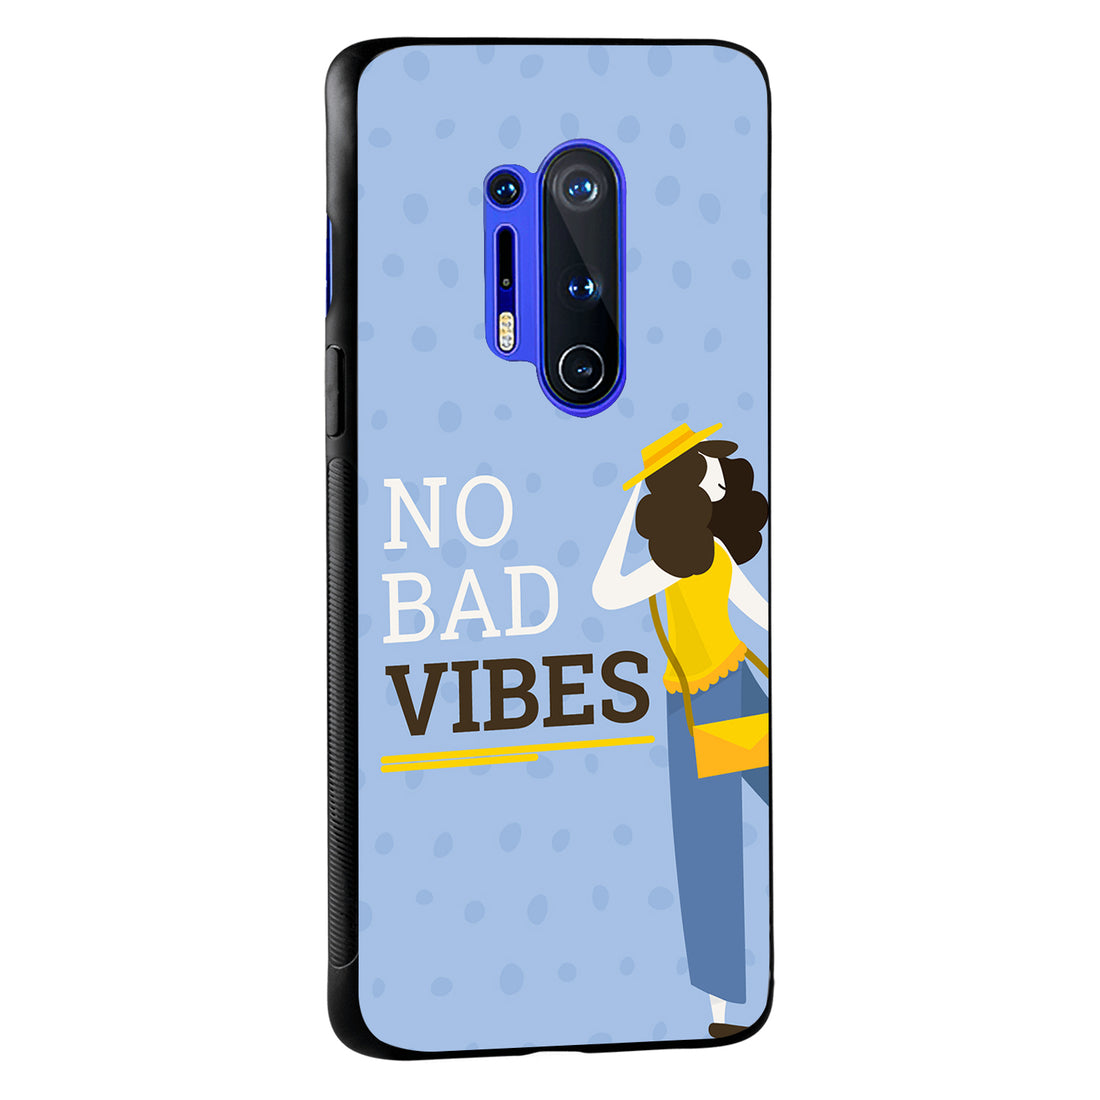 No Bad Vibes Motivational Quotes Oneplus 8 Pro Back Case